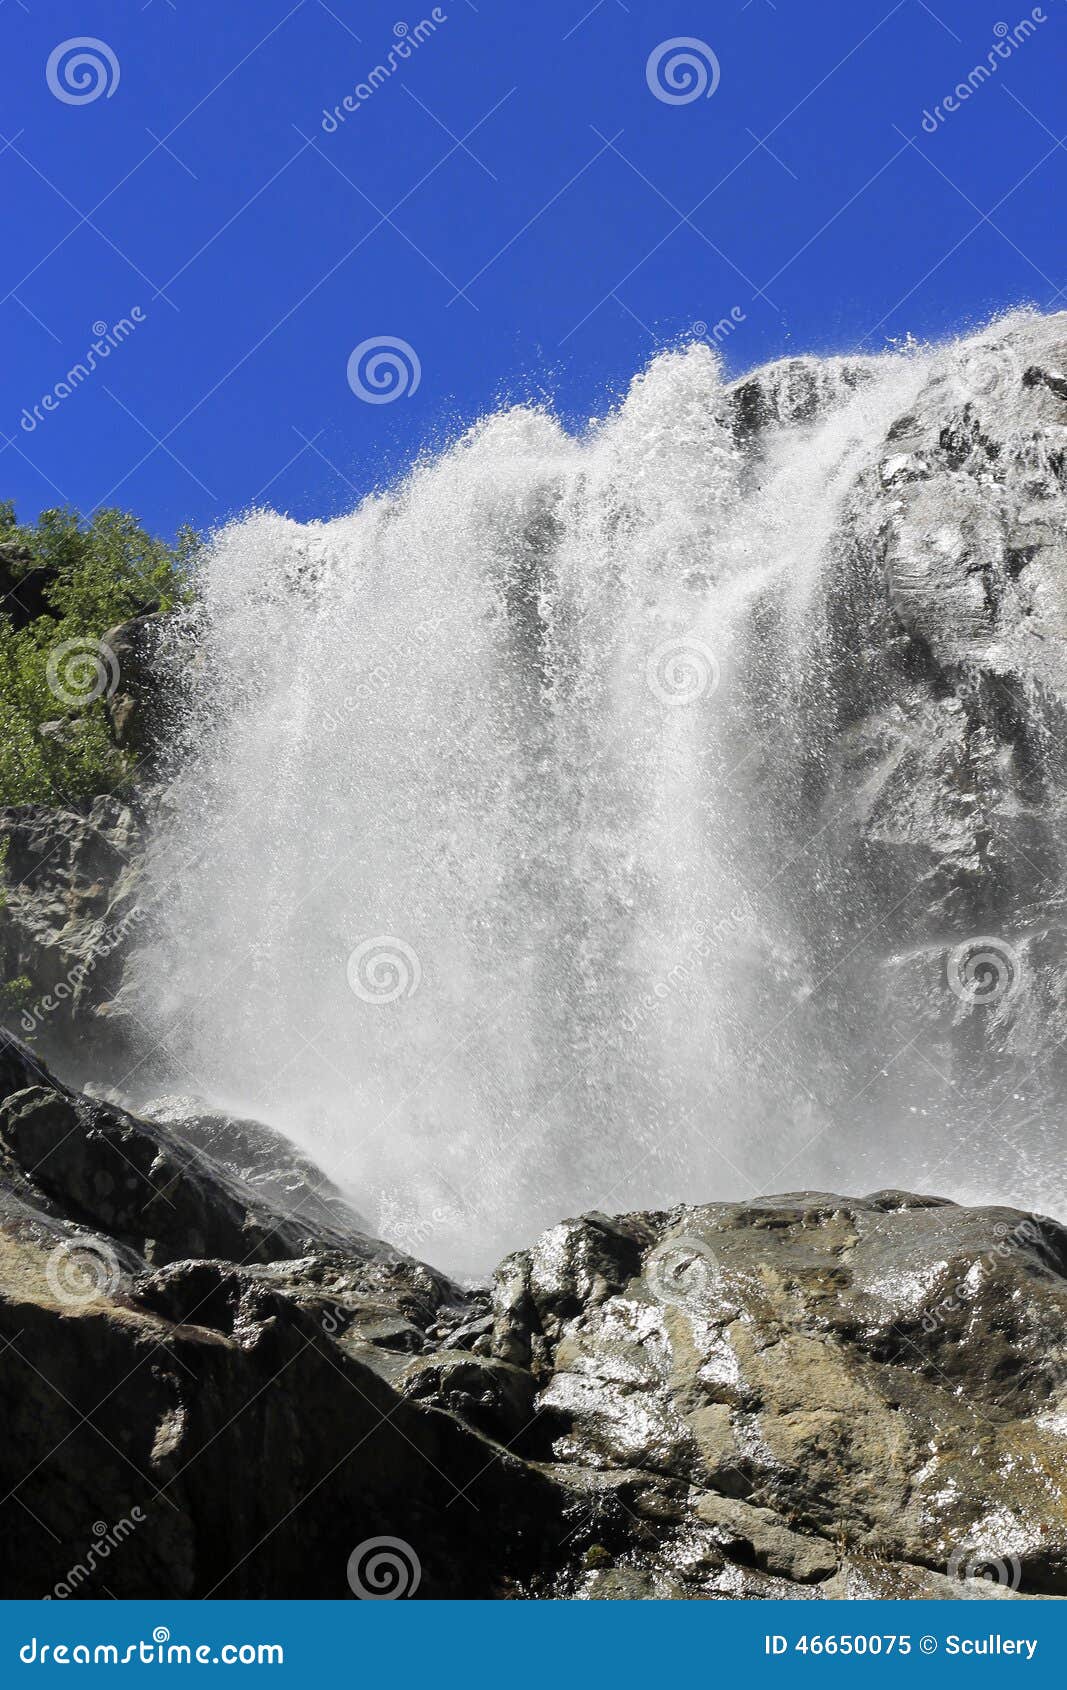 alibek waterfall. dombay mountains. the northern caucas